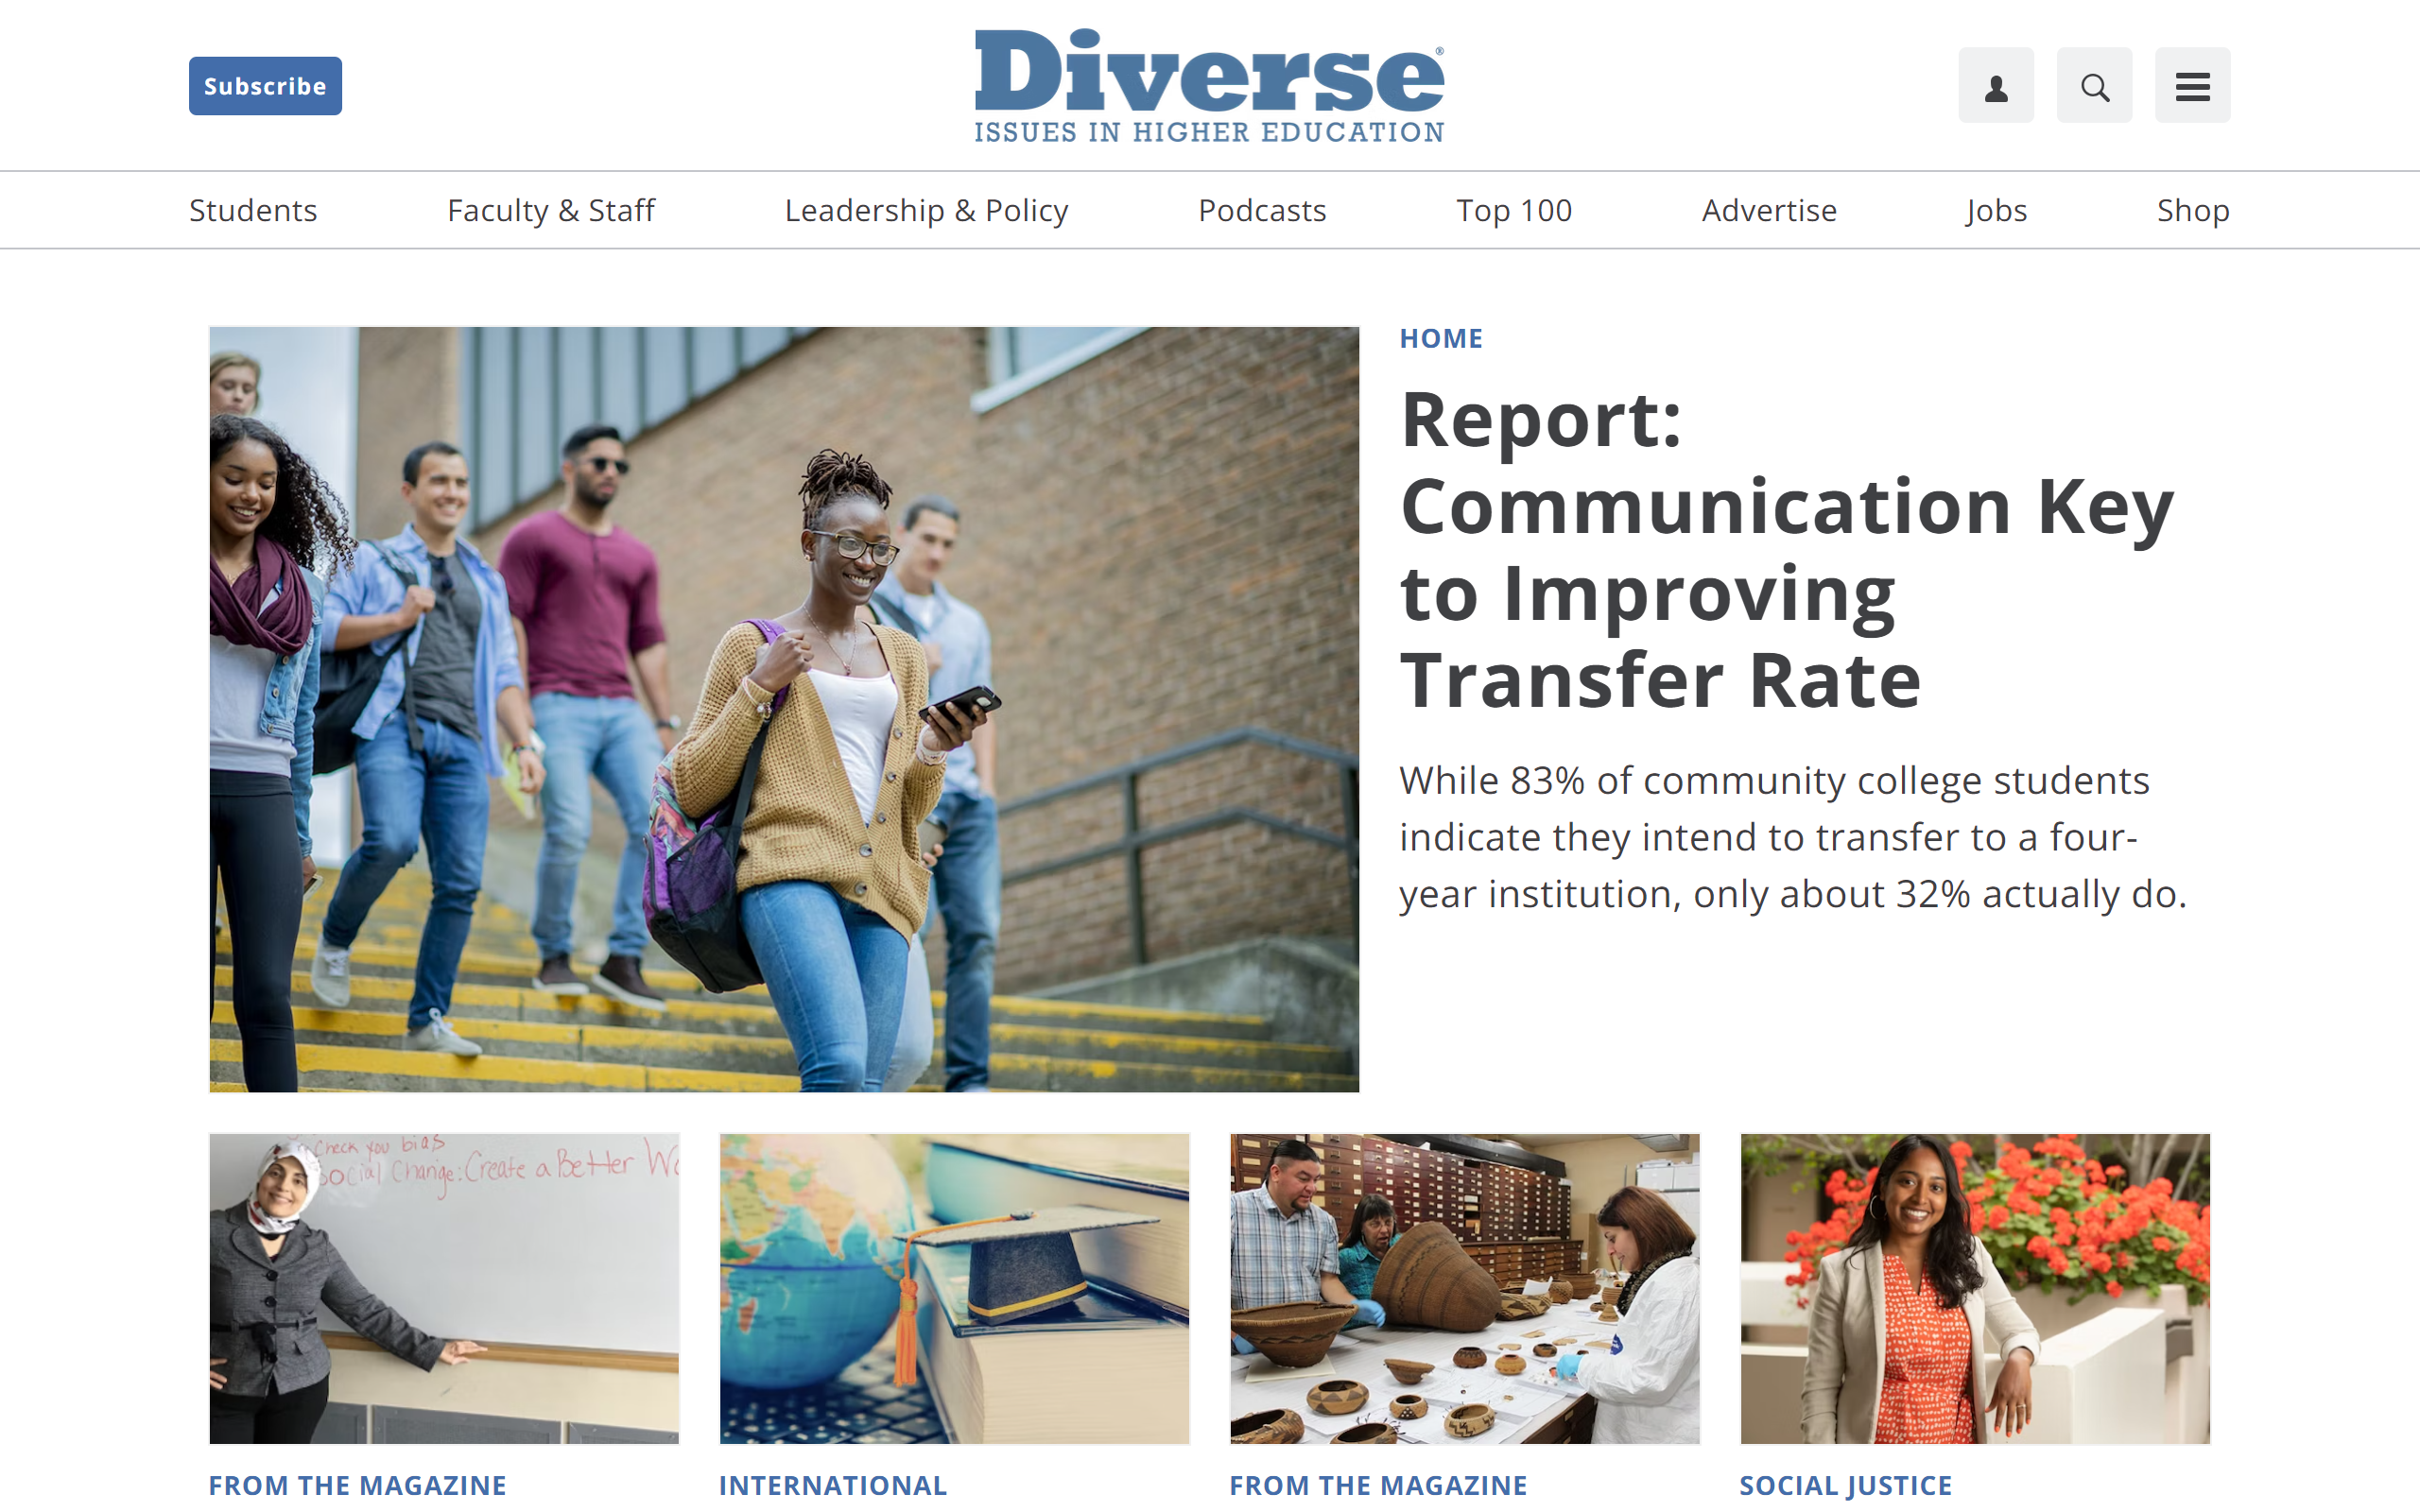 Diverse: Issues in Higher Education teacher blog